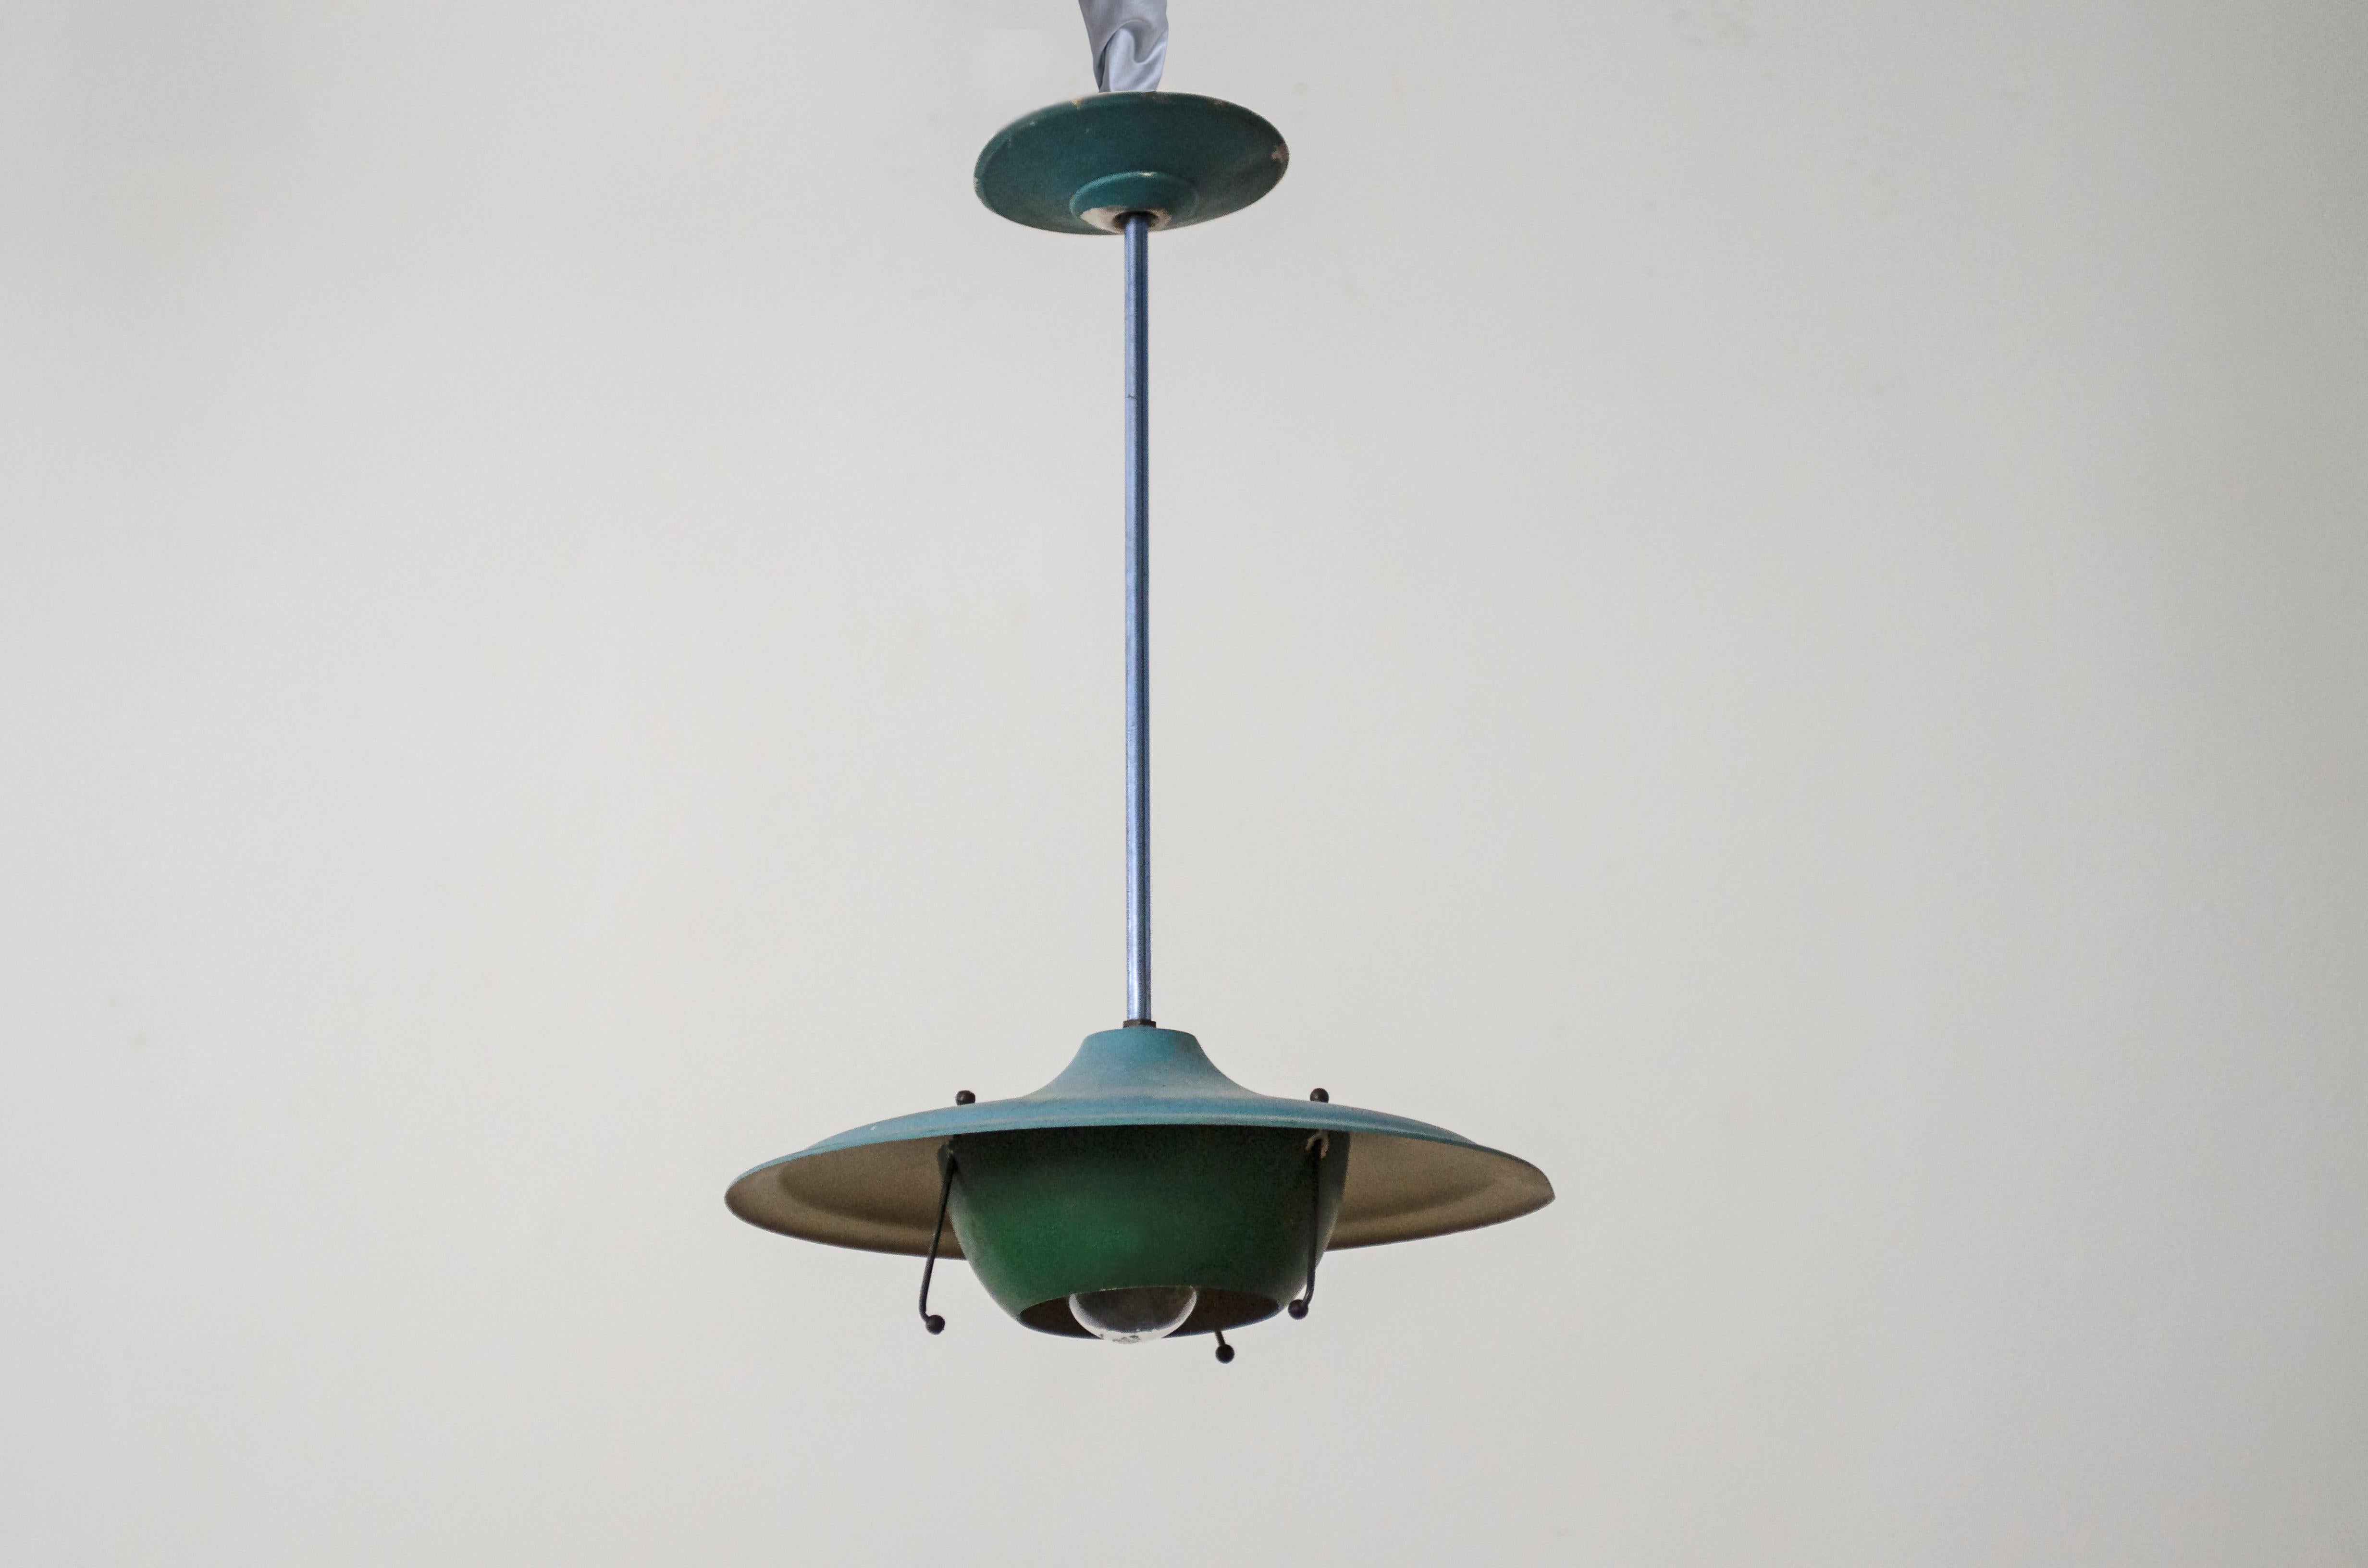 Italian pendant lamp attributed to Stilnovo. Brass support, arm and cup. Green patinated with marks of time and use on the brass.

Italy, CIRCA 1950.